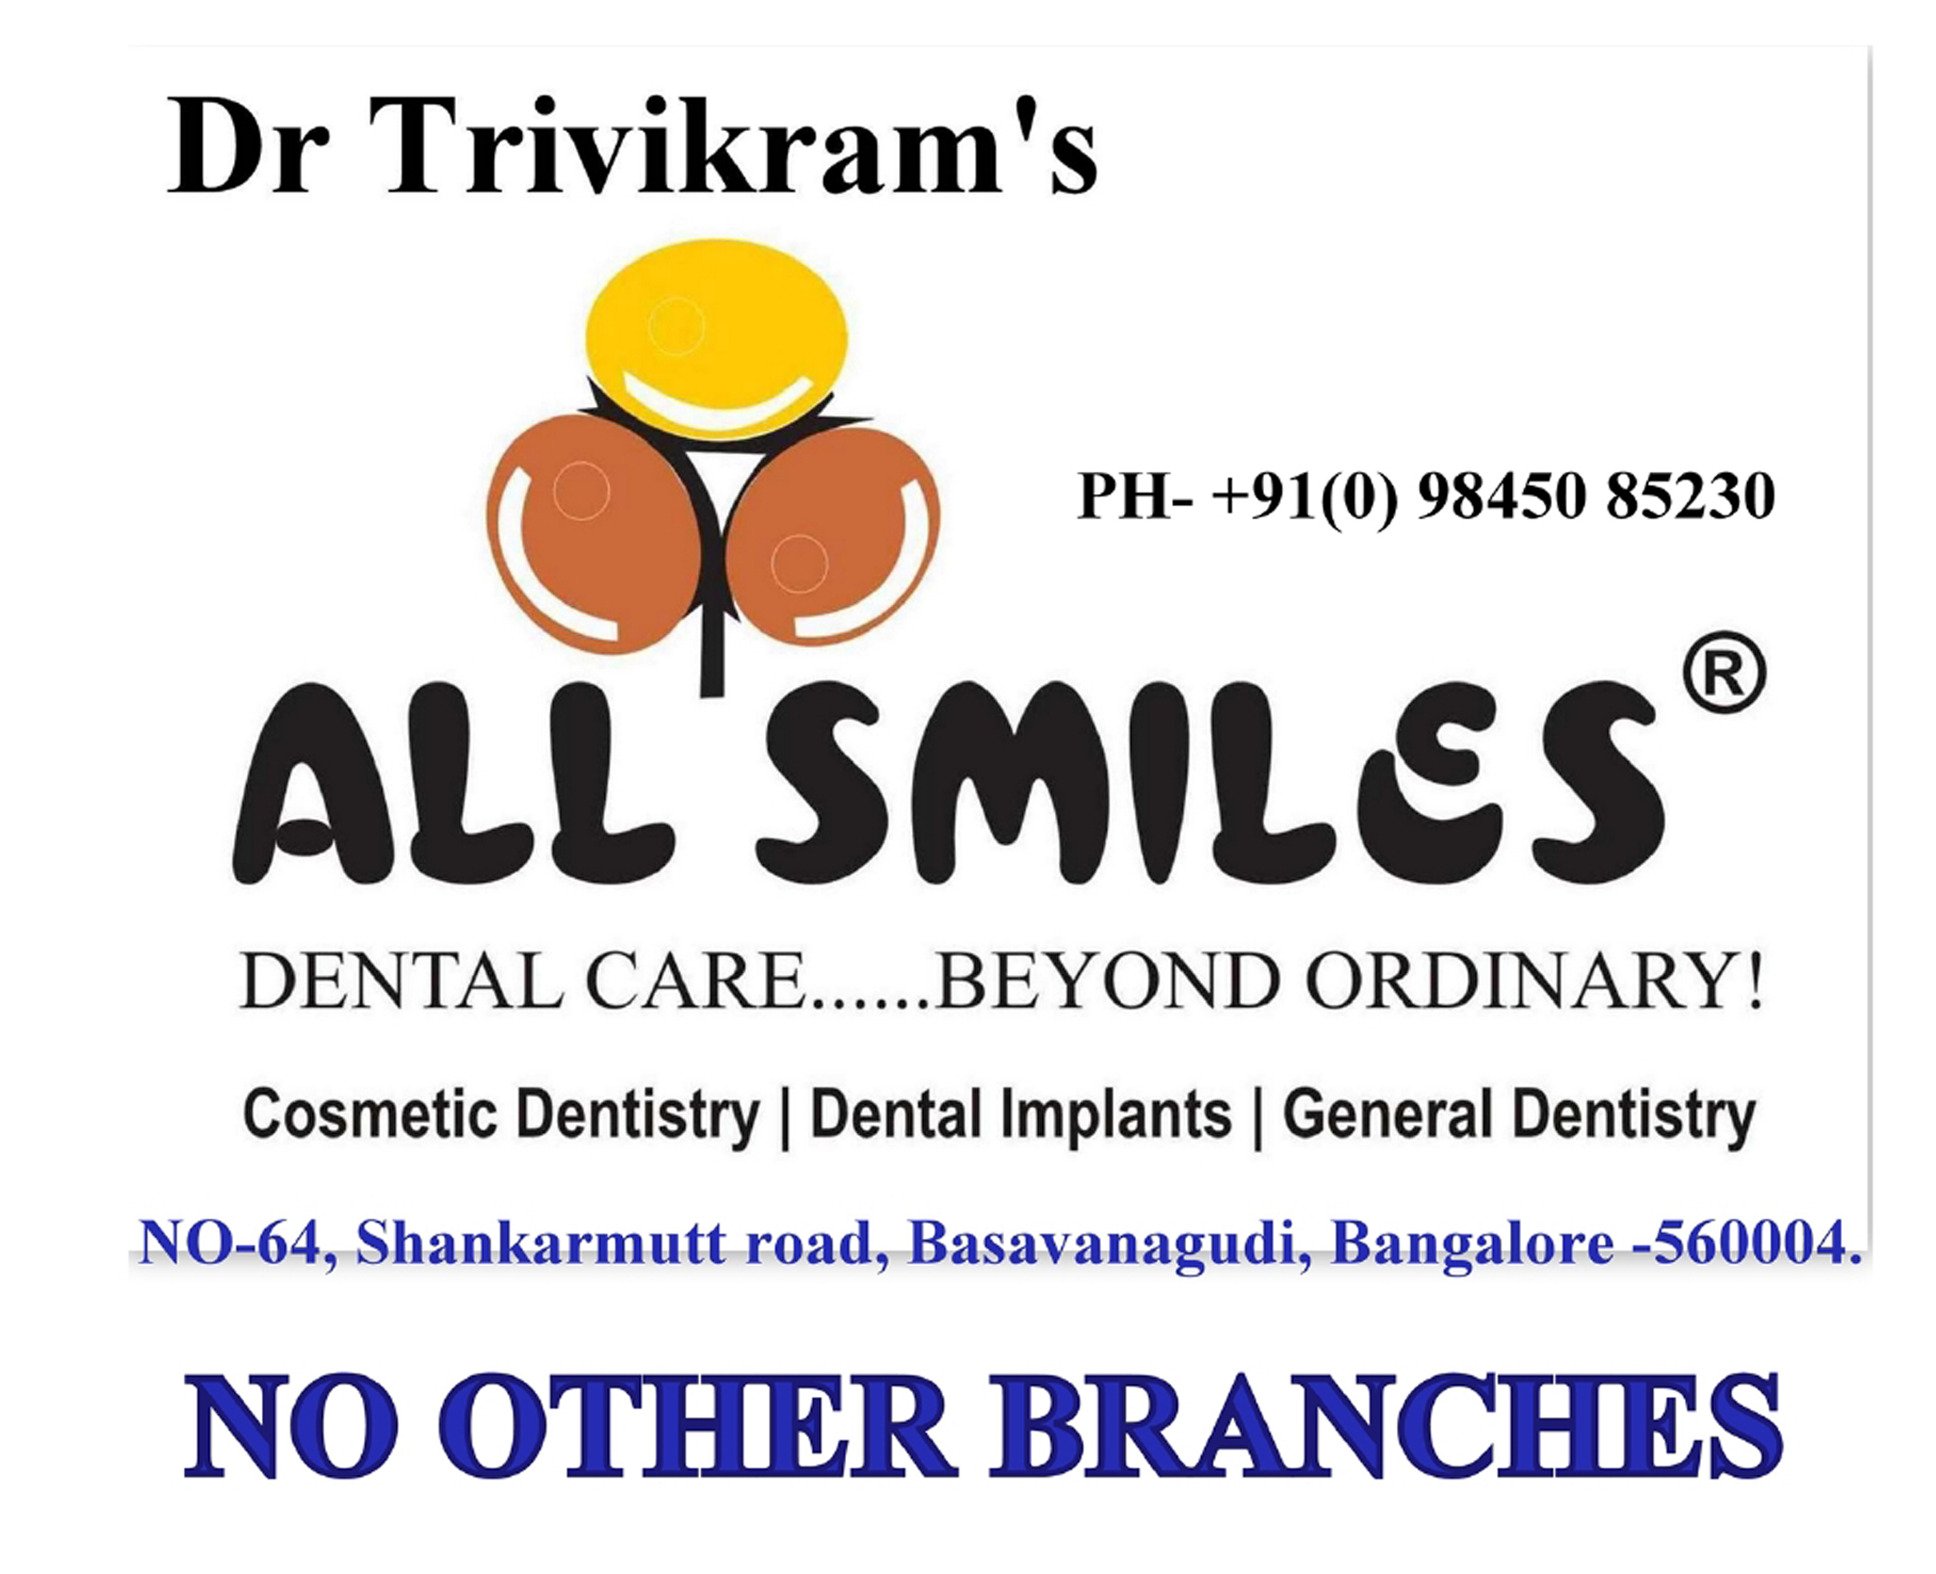 All Smiles Dental|Veterinary|Medical Services